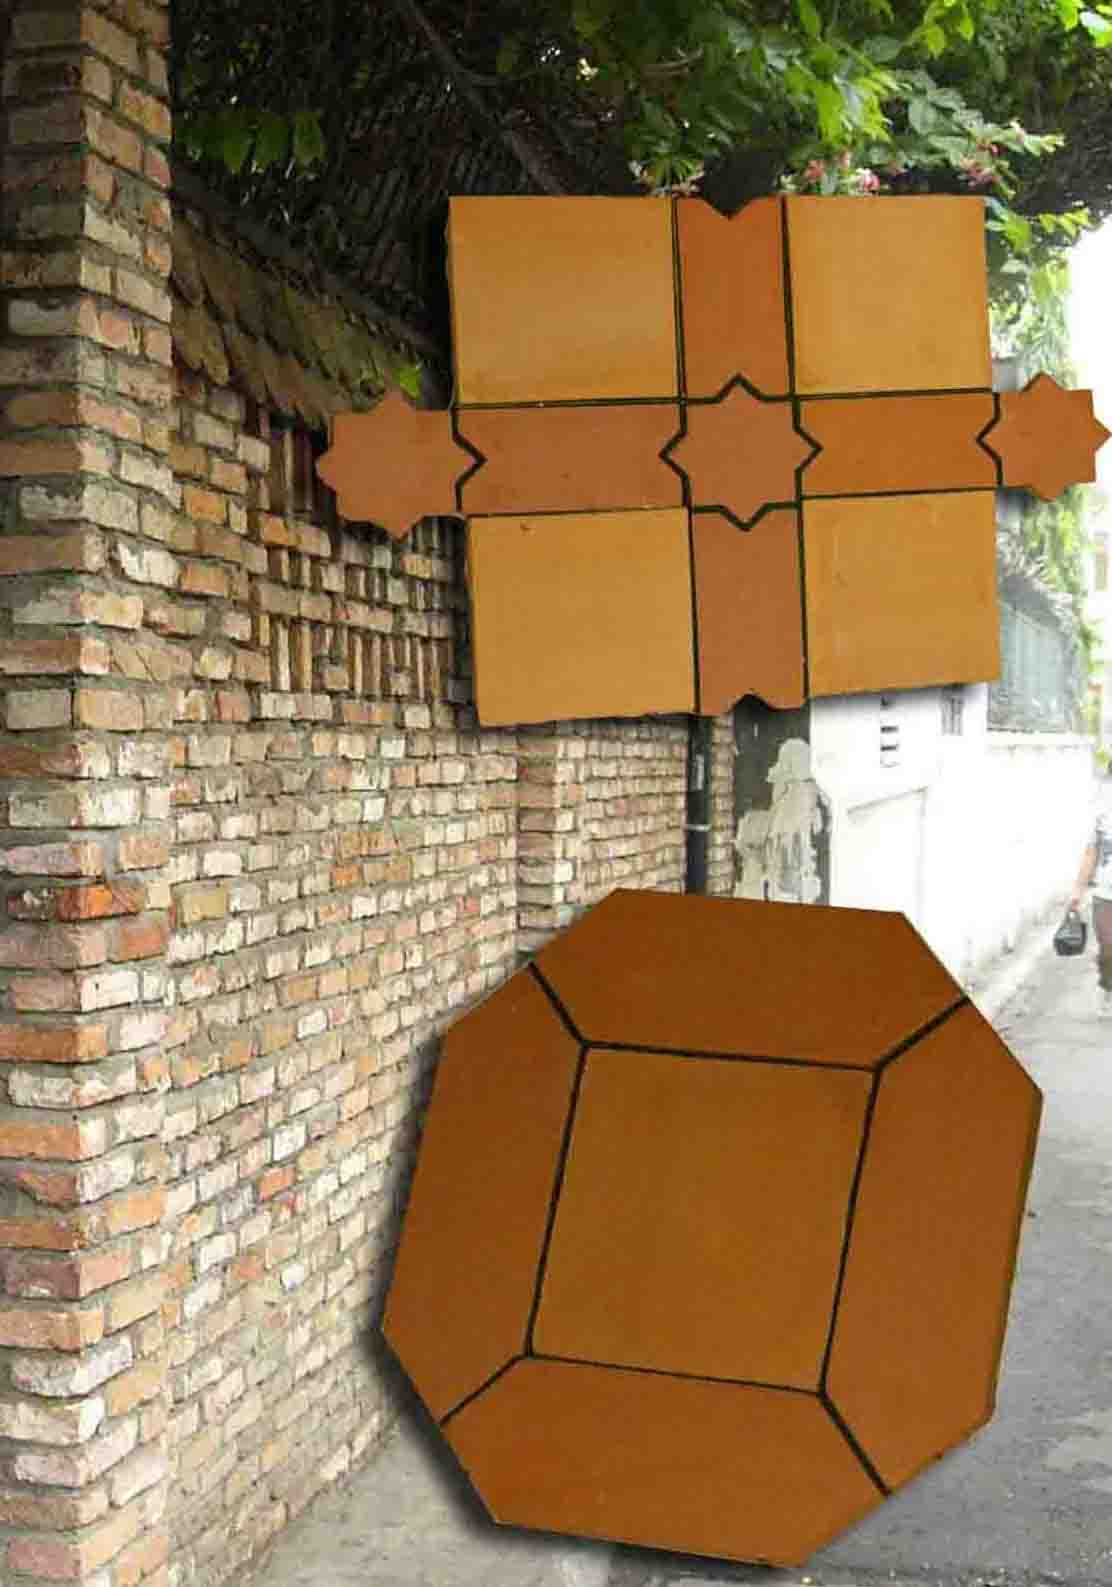  Terracotta Deco Clay Block And Tiles ( Terracotta Deco Clay Block And Tiles)